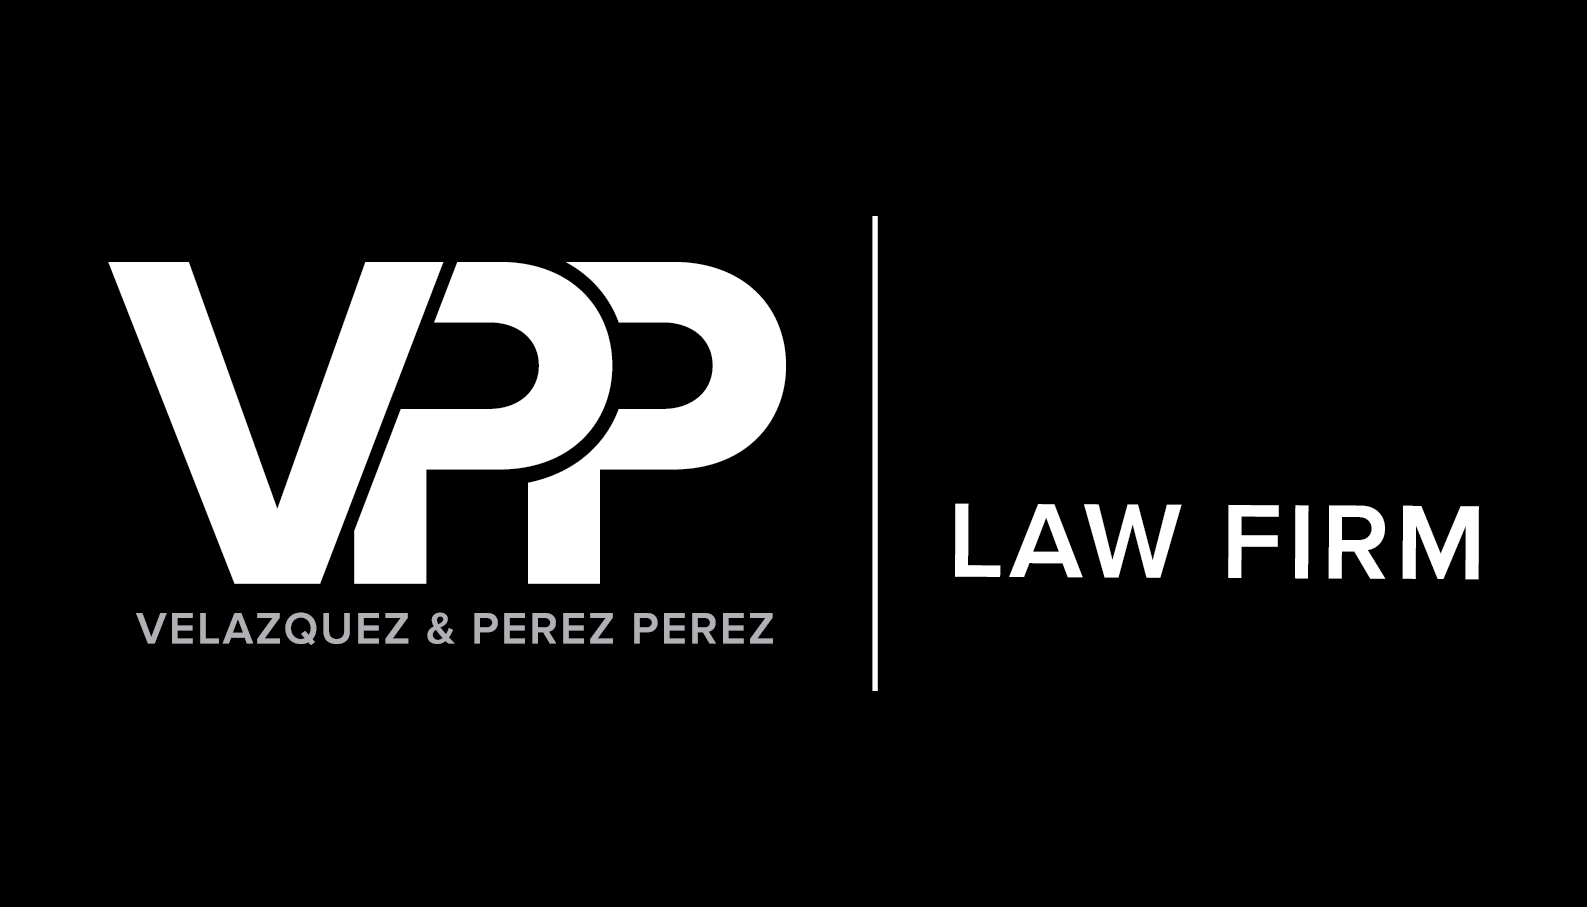 Image VPP Law Firm the Insurance Attorneys in Miami FL - Gallery of ListasLocales.com